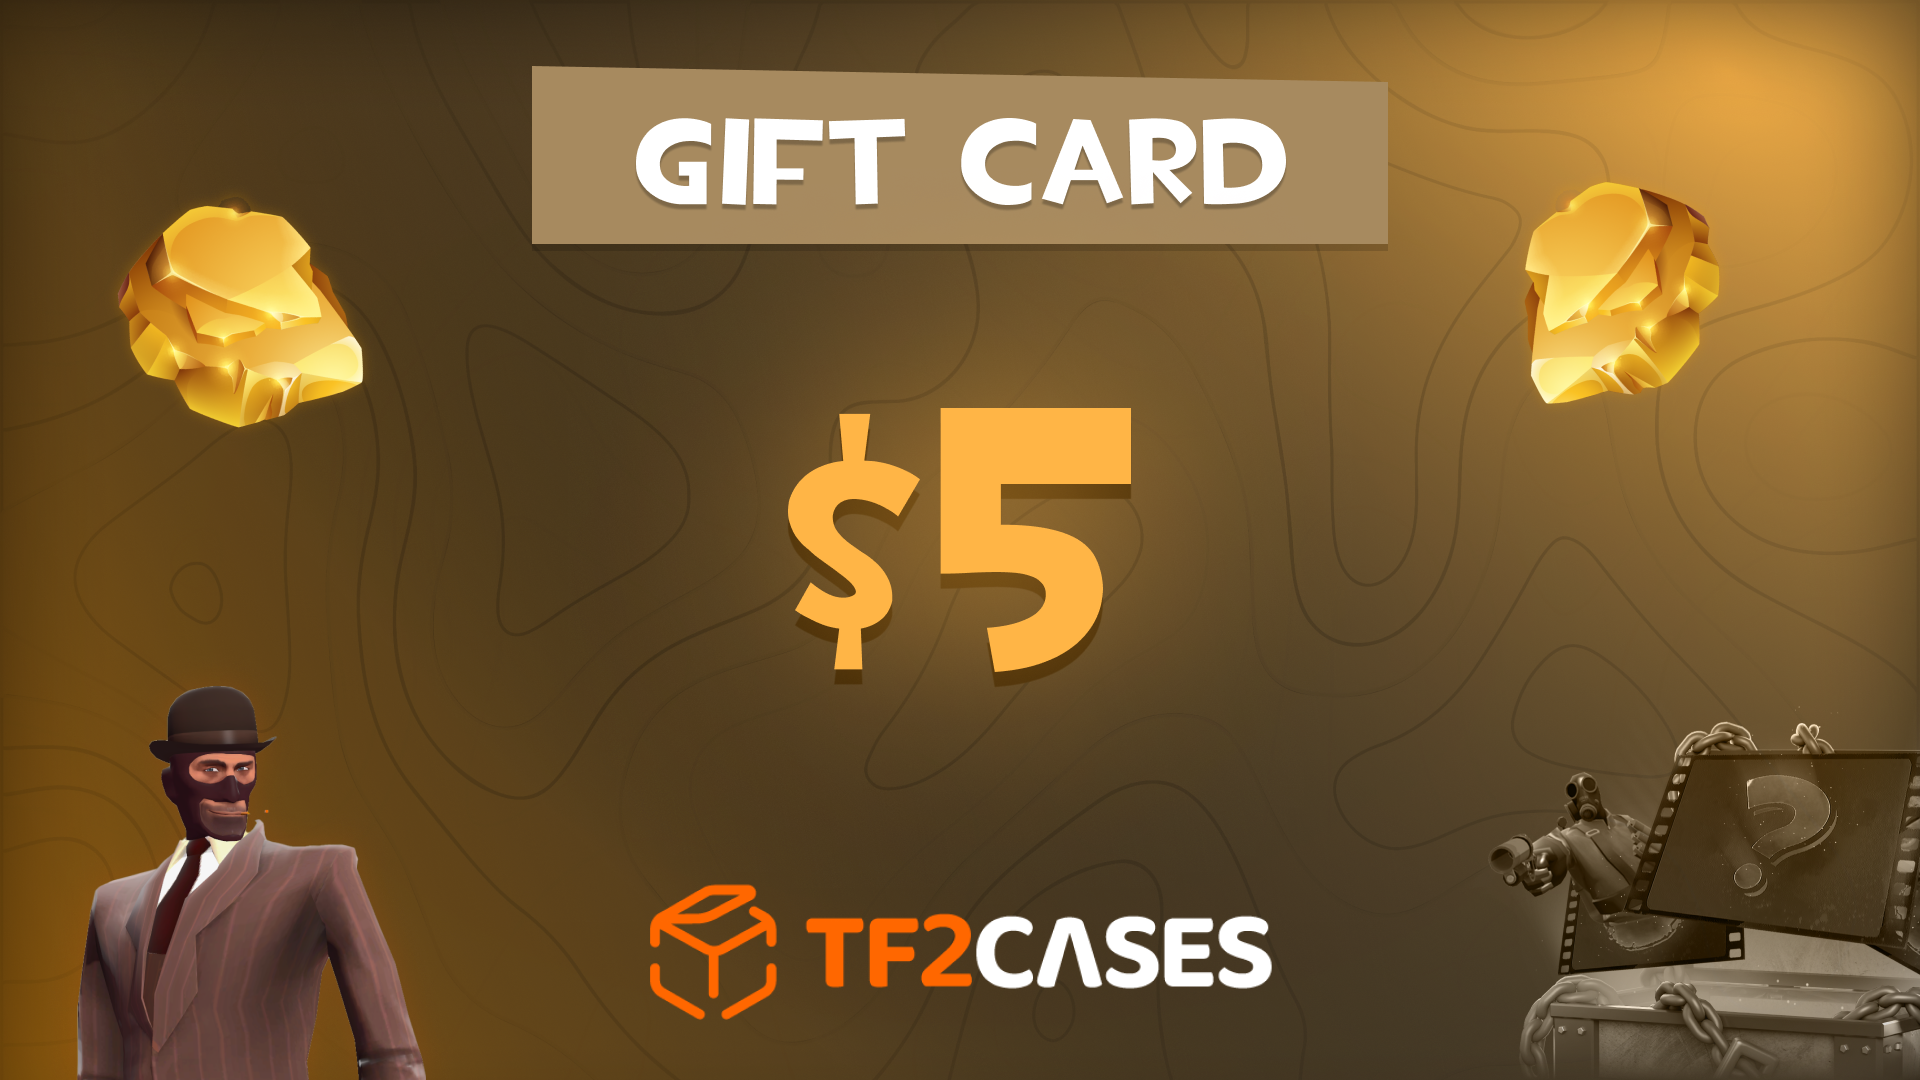 TF2CASES.com $5 Gift Card (5.65$)